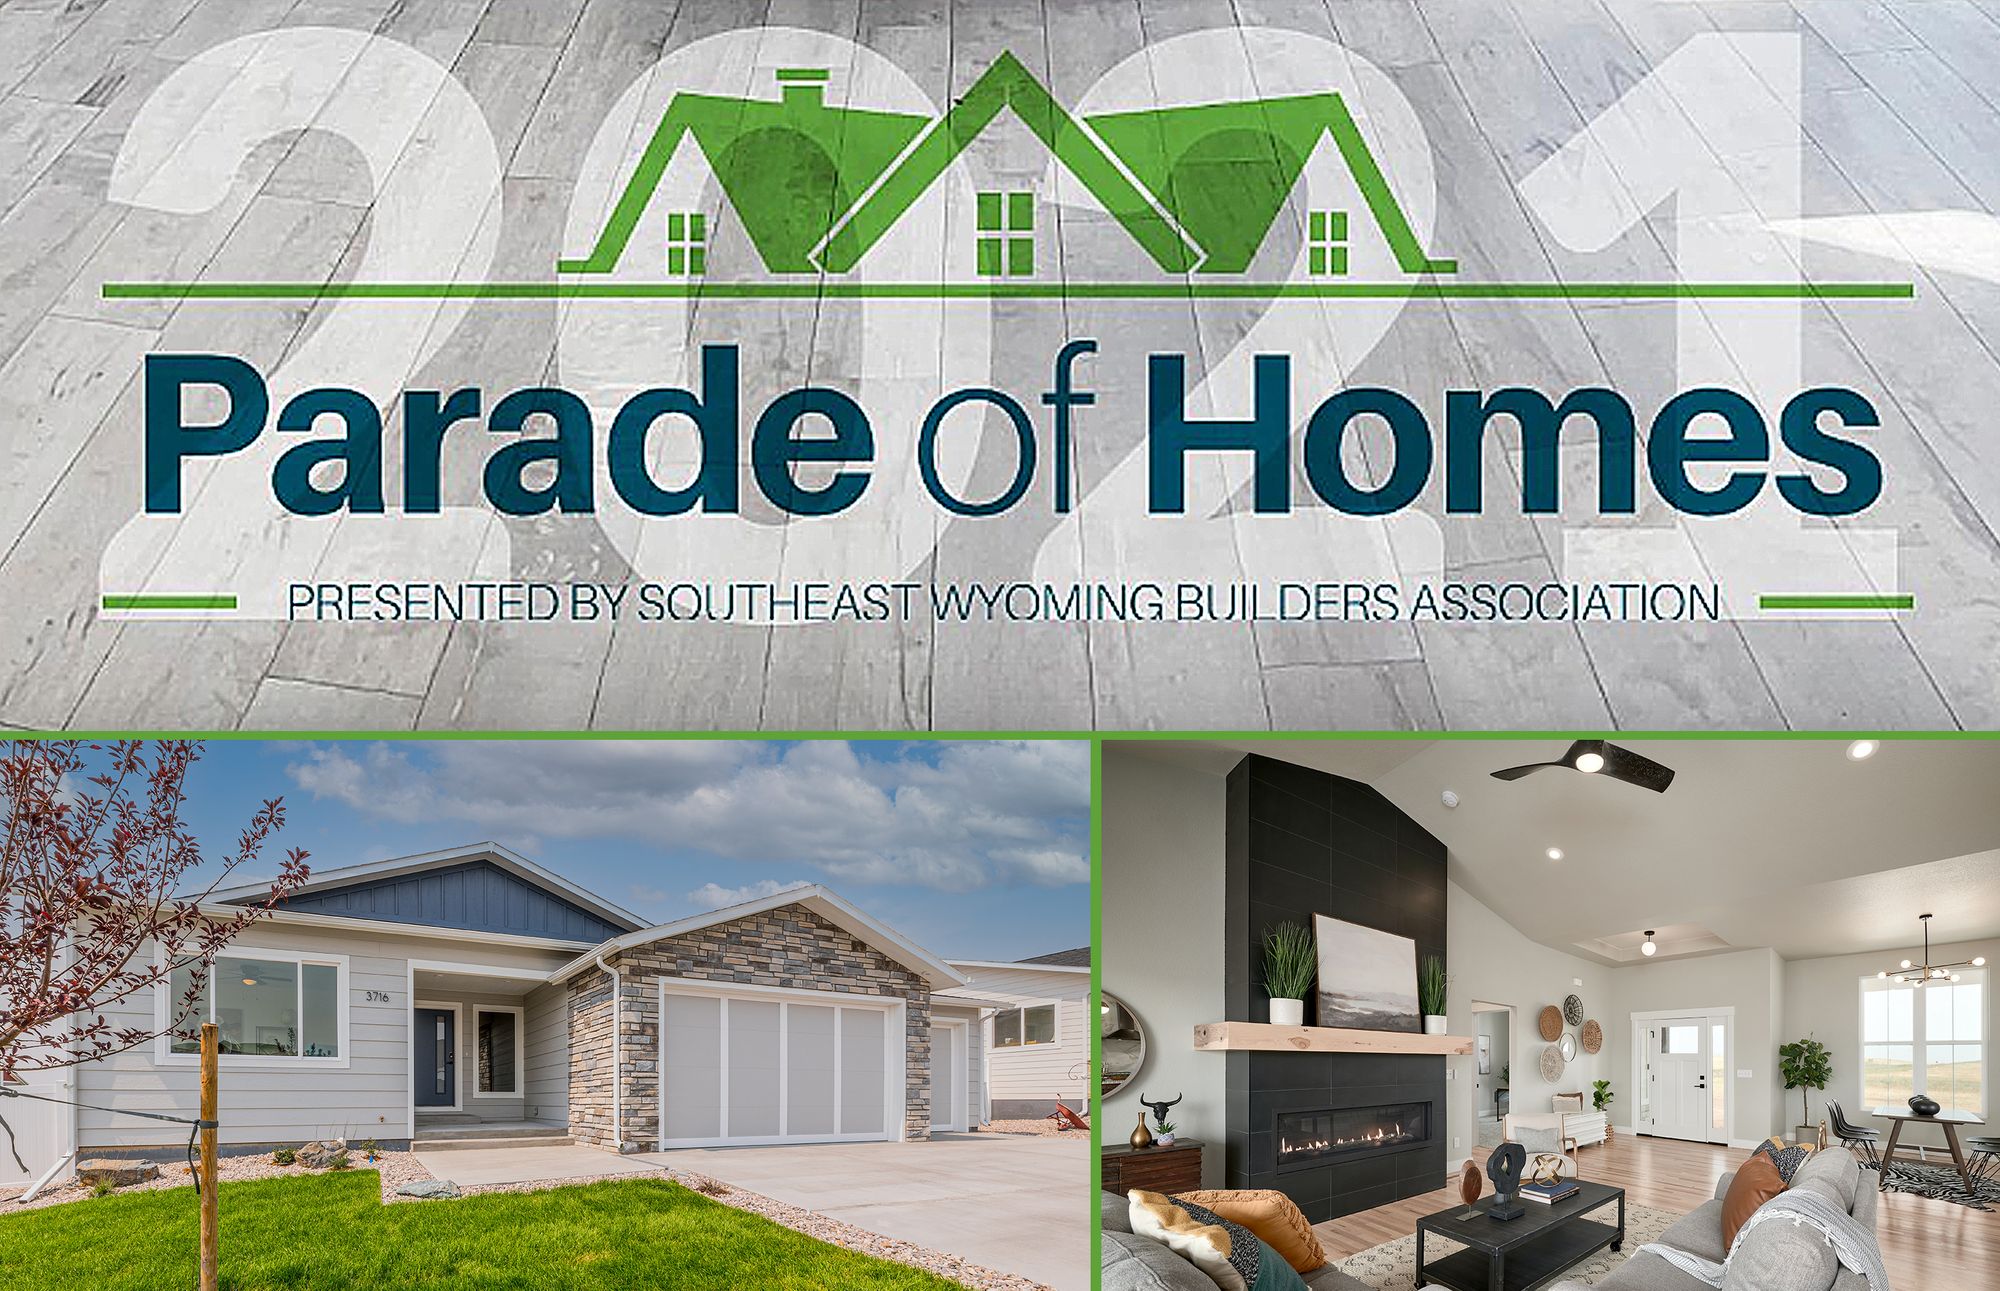 Take A Tour Of The 2021 Parade Of Homes This Weekend